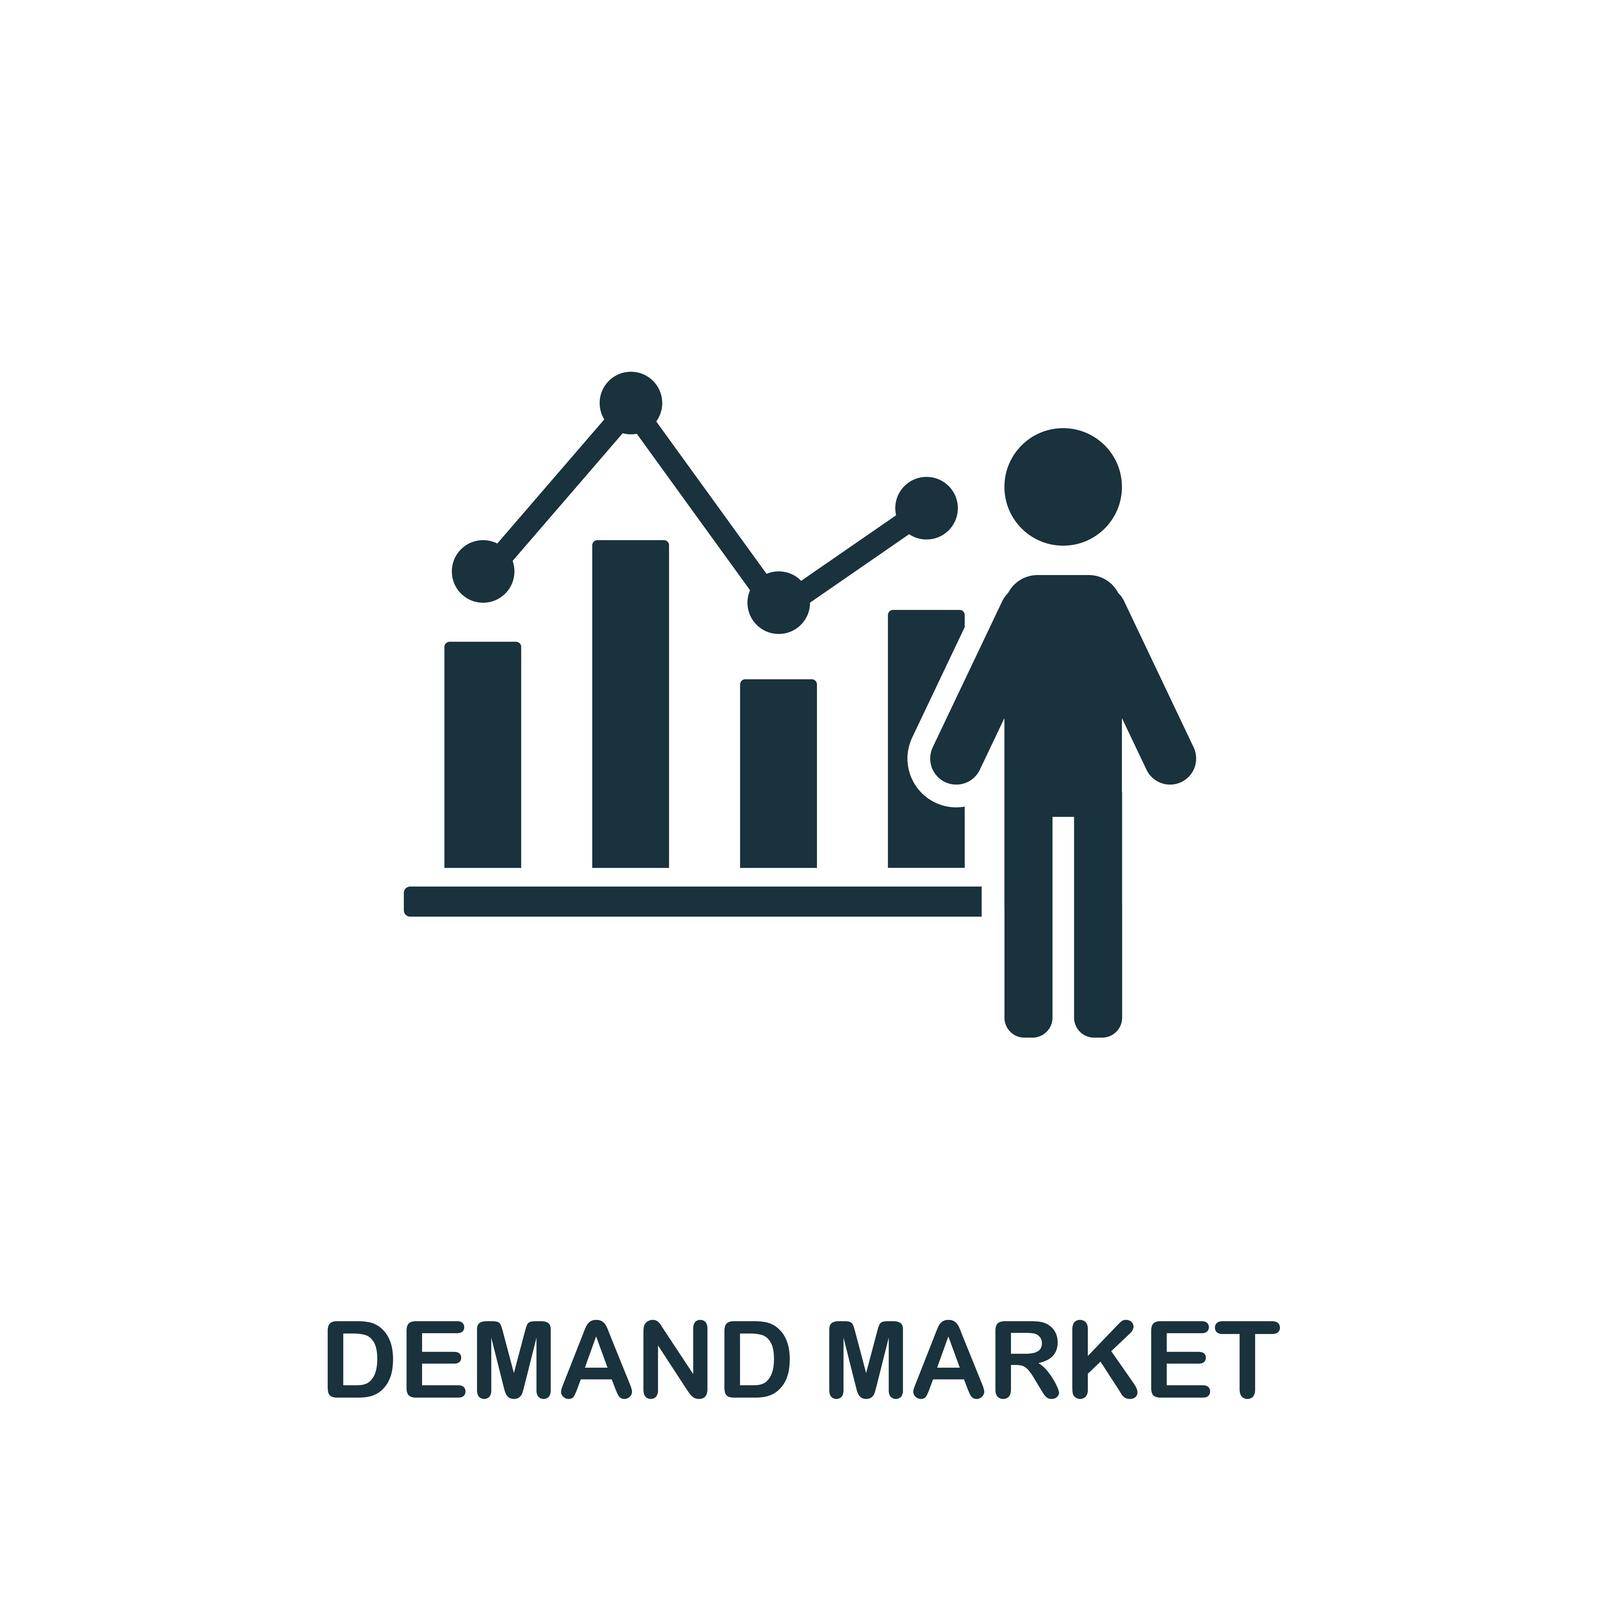 Demand Market icon. Black sign from market economy collection. Creative Demand Market icon for web design, templates and infographics.